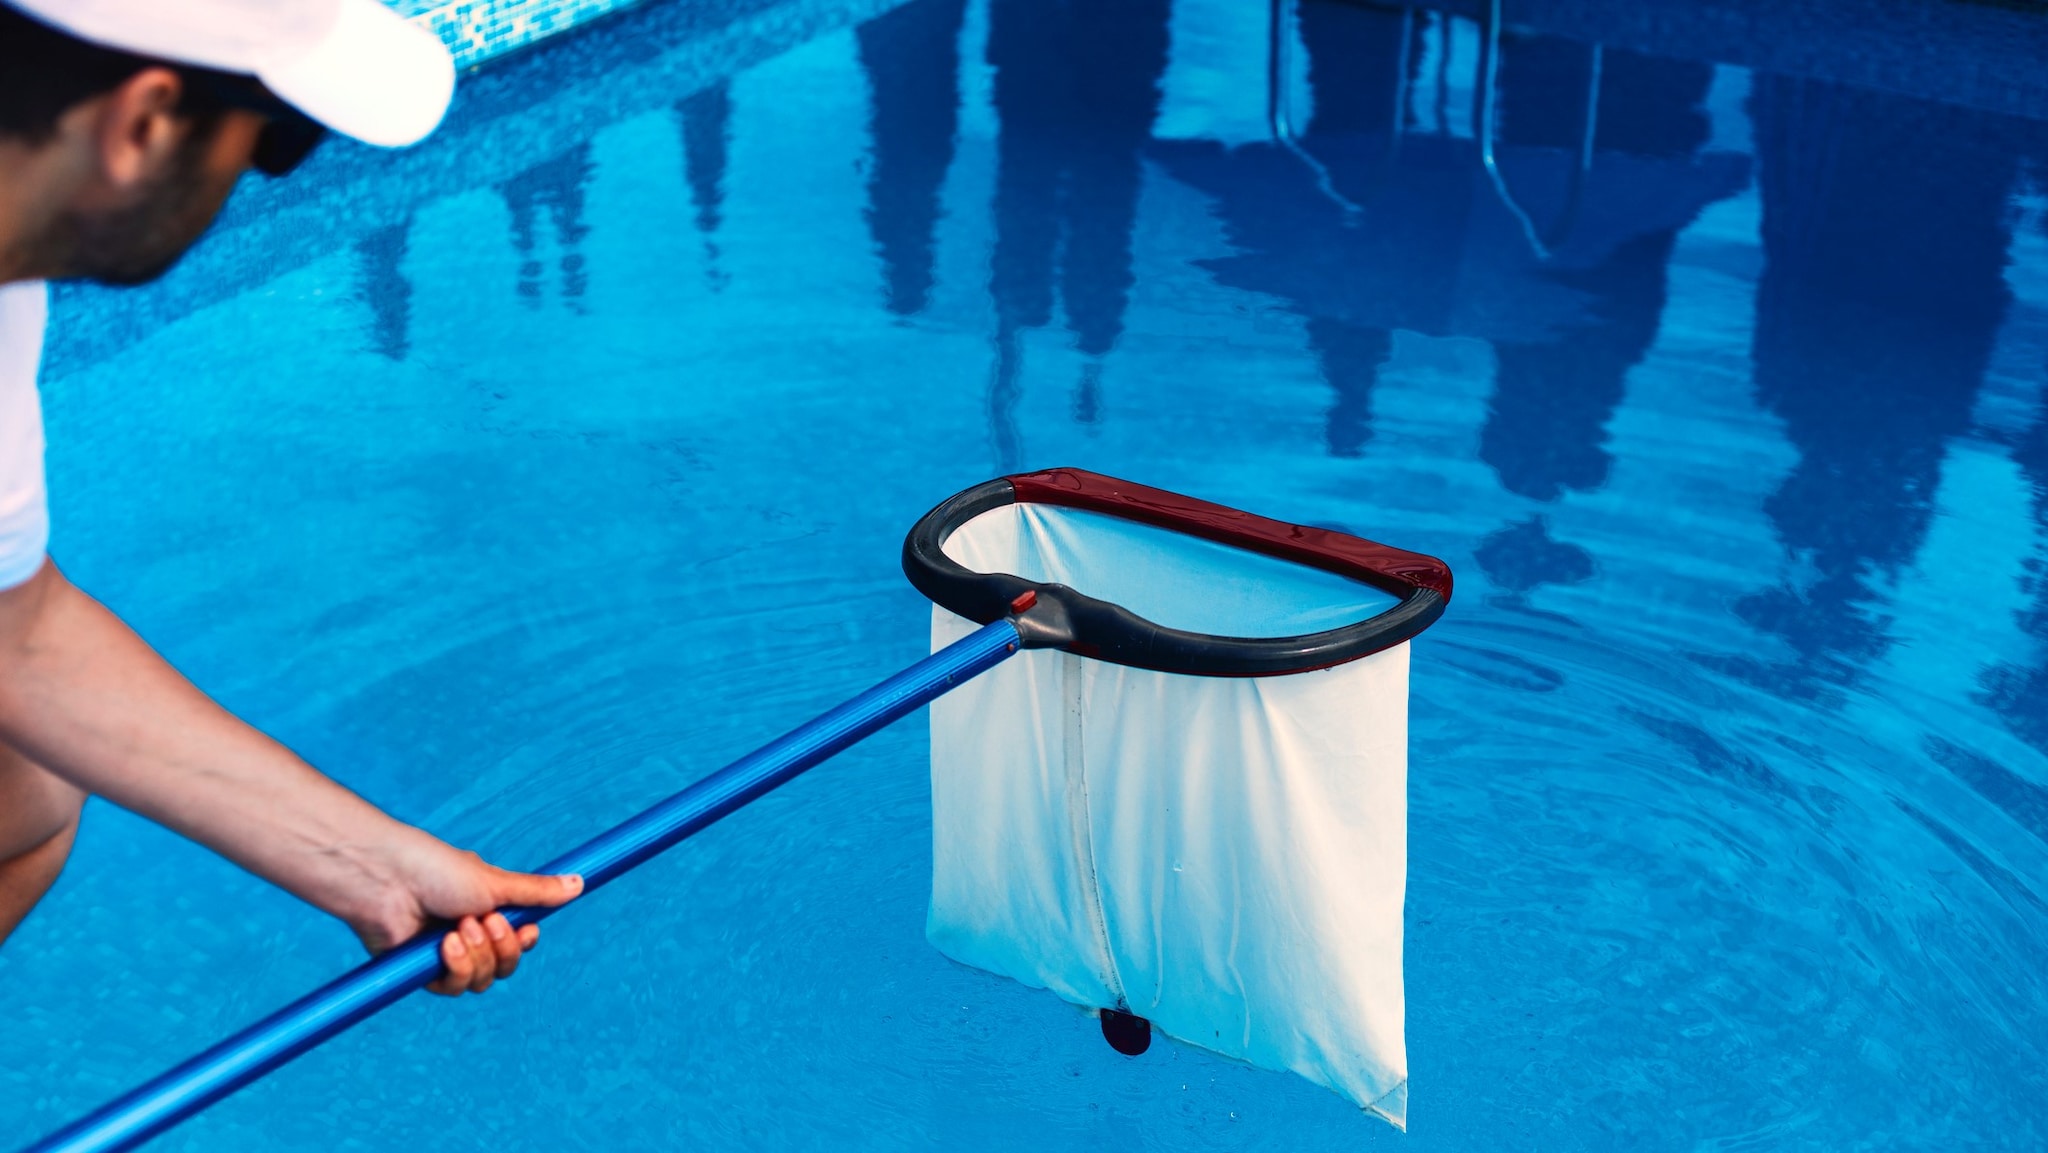 Man with a hat holding a pool net over a pool.